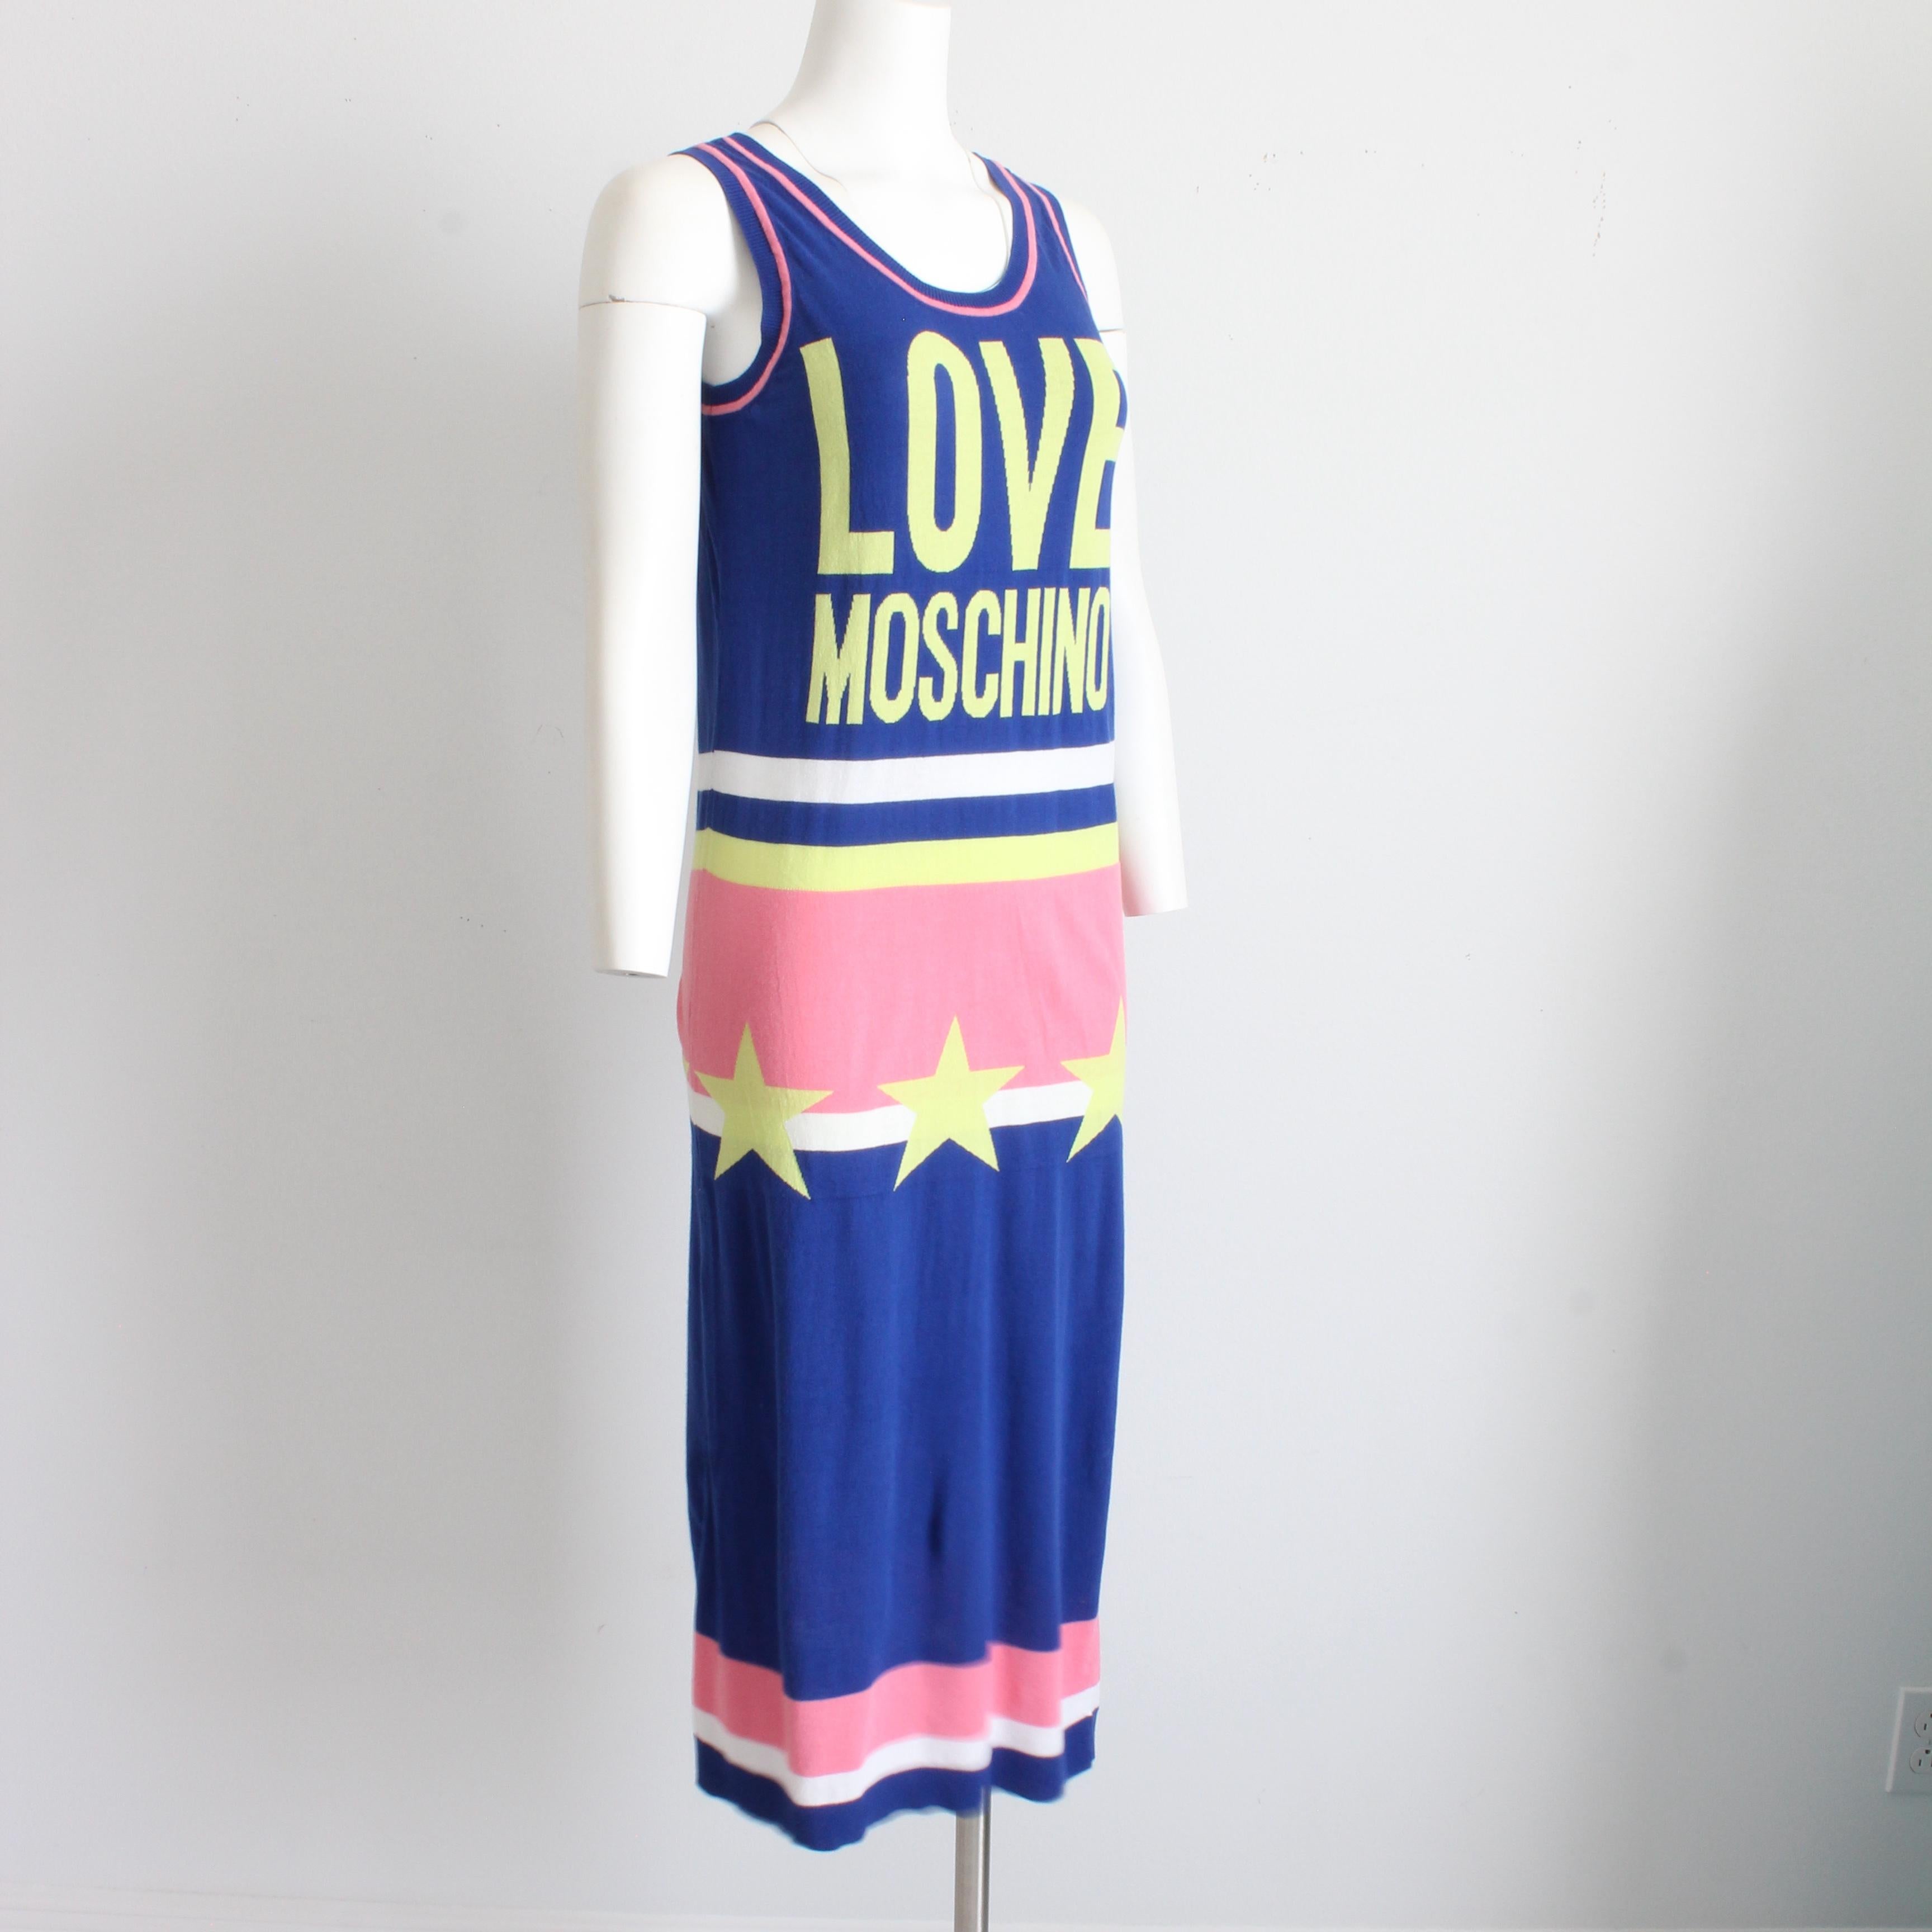 Moschino Maxi Dress Color Block All Stars Pink Blue Cotton Knit Sweater Sz 2 In Good Condition For Sale In Port Saint Lucie, FL